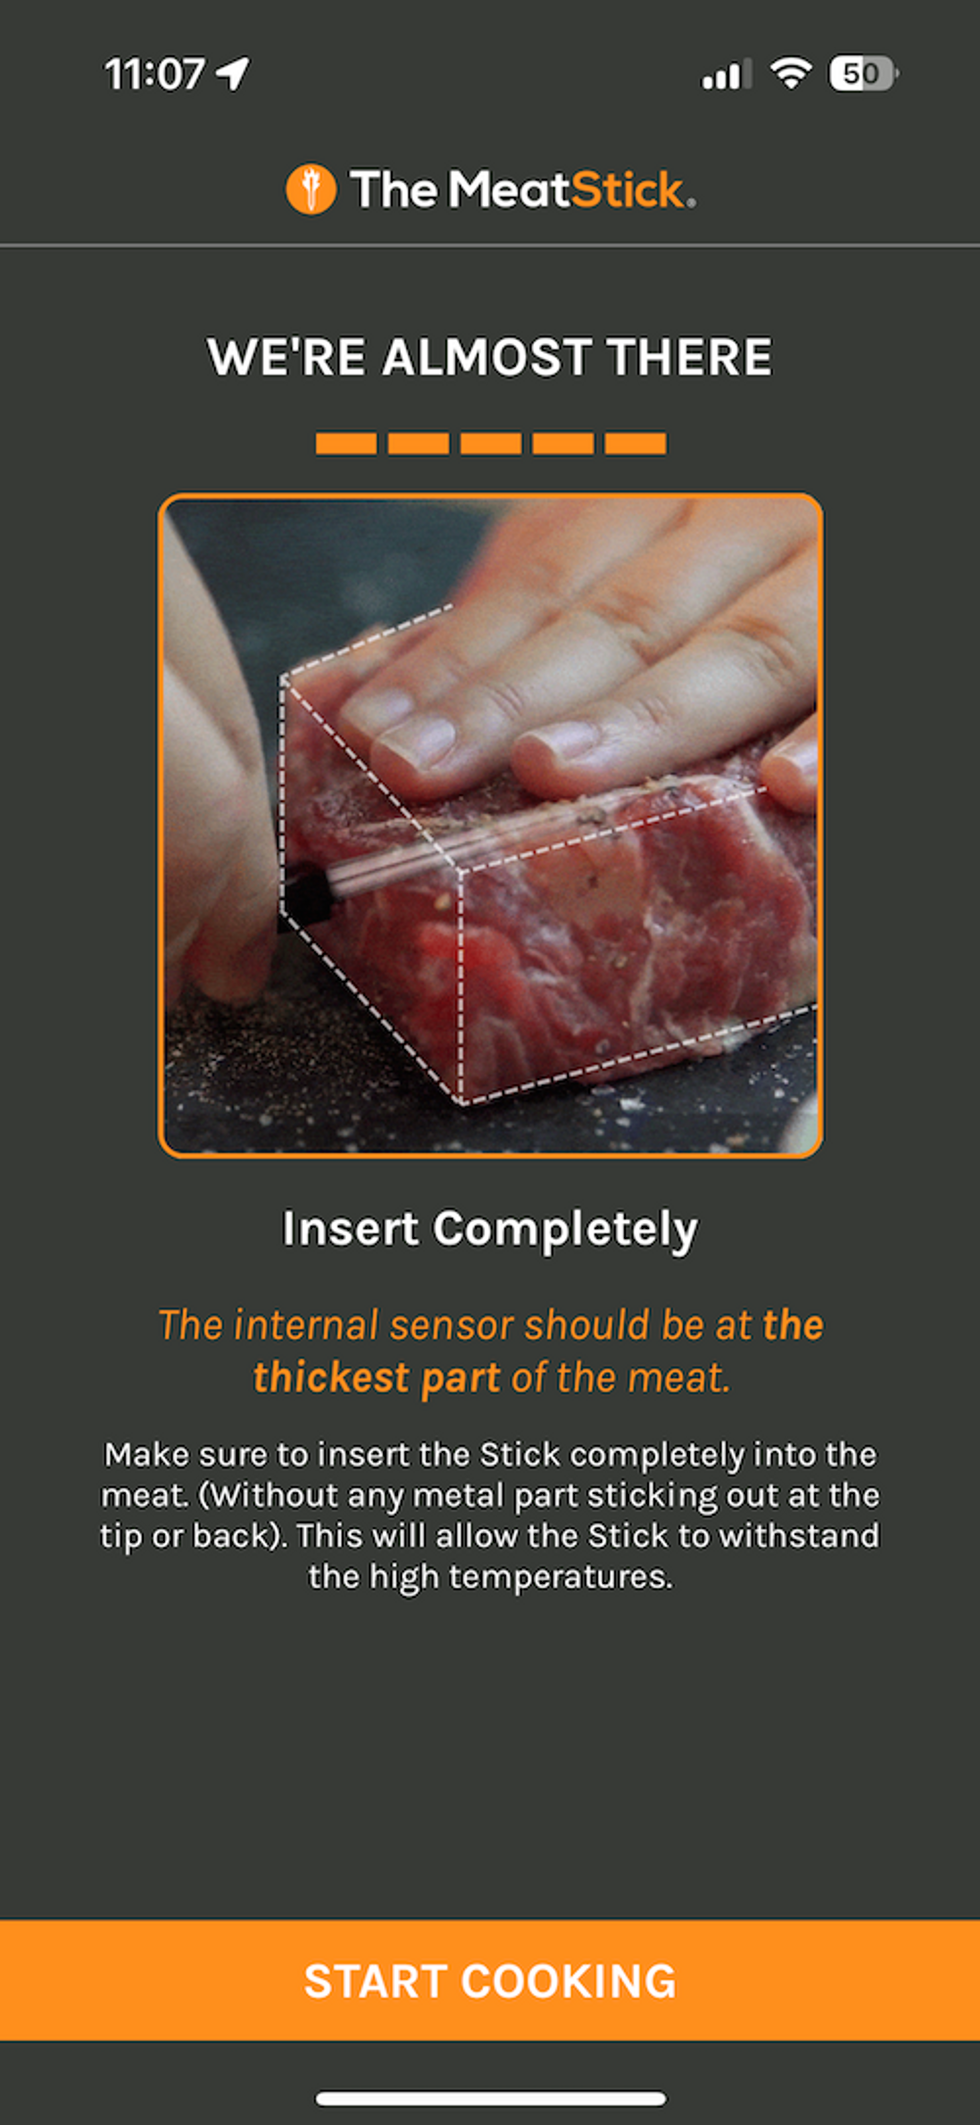 MeatStick App showing how to insert thermometer